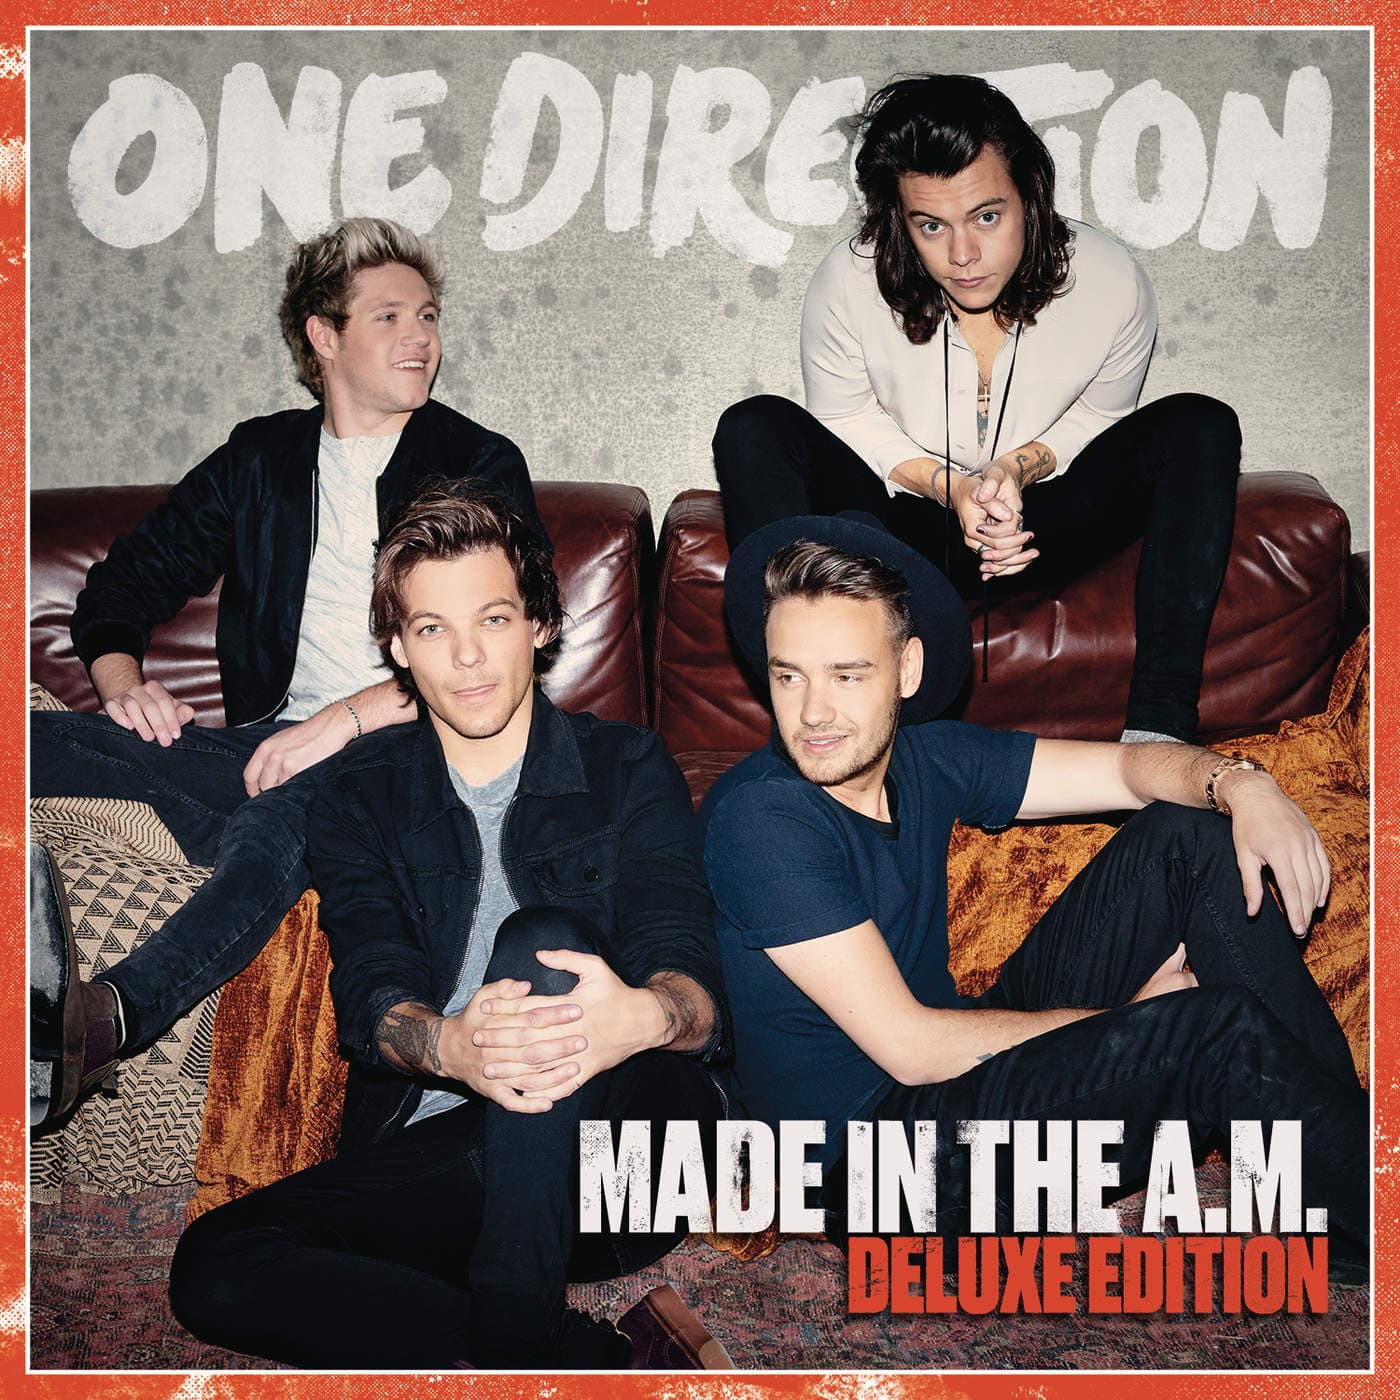 Album Review: “Made in the A.M.”